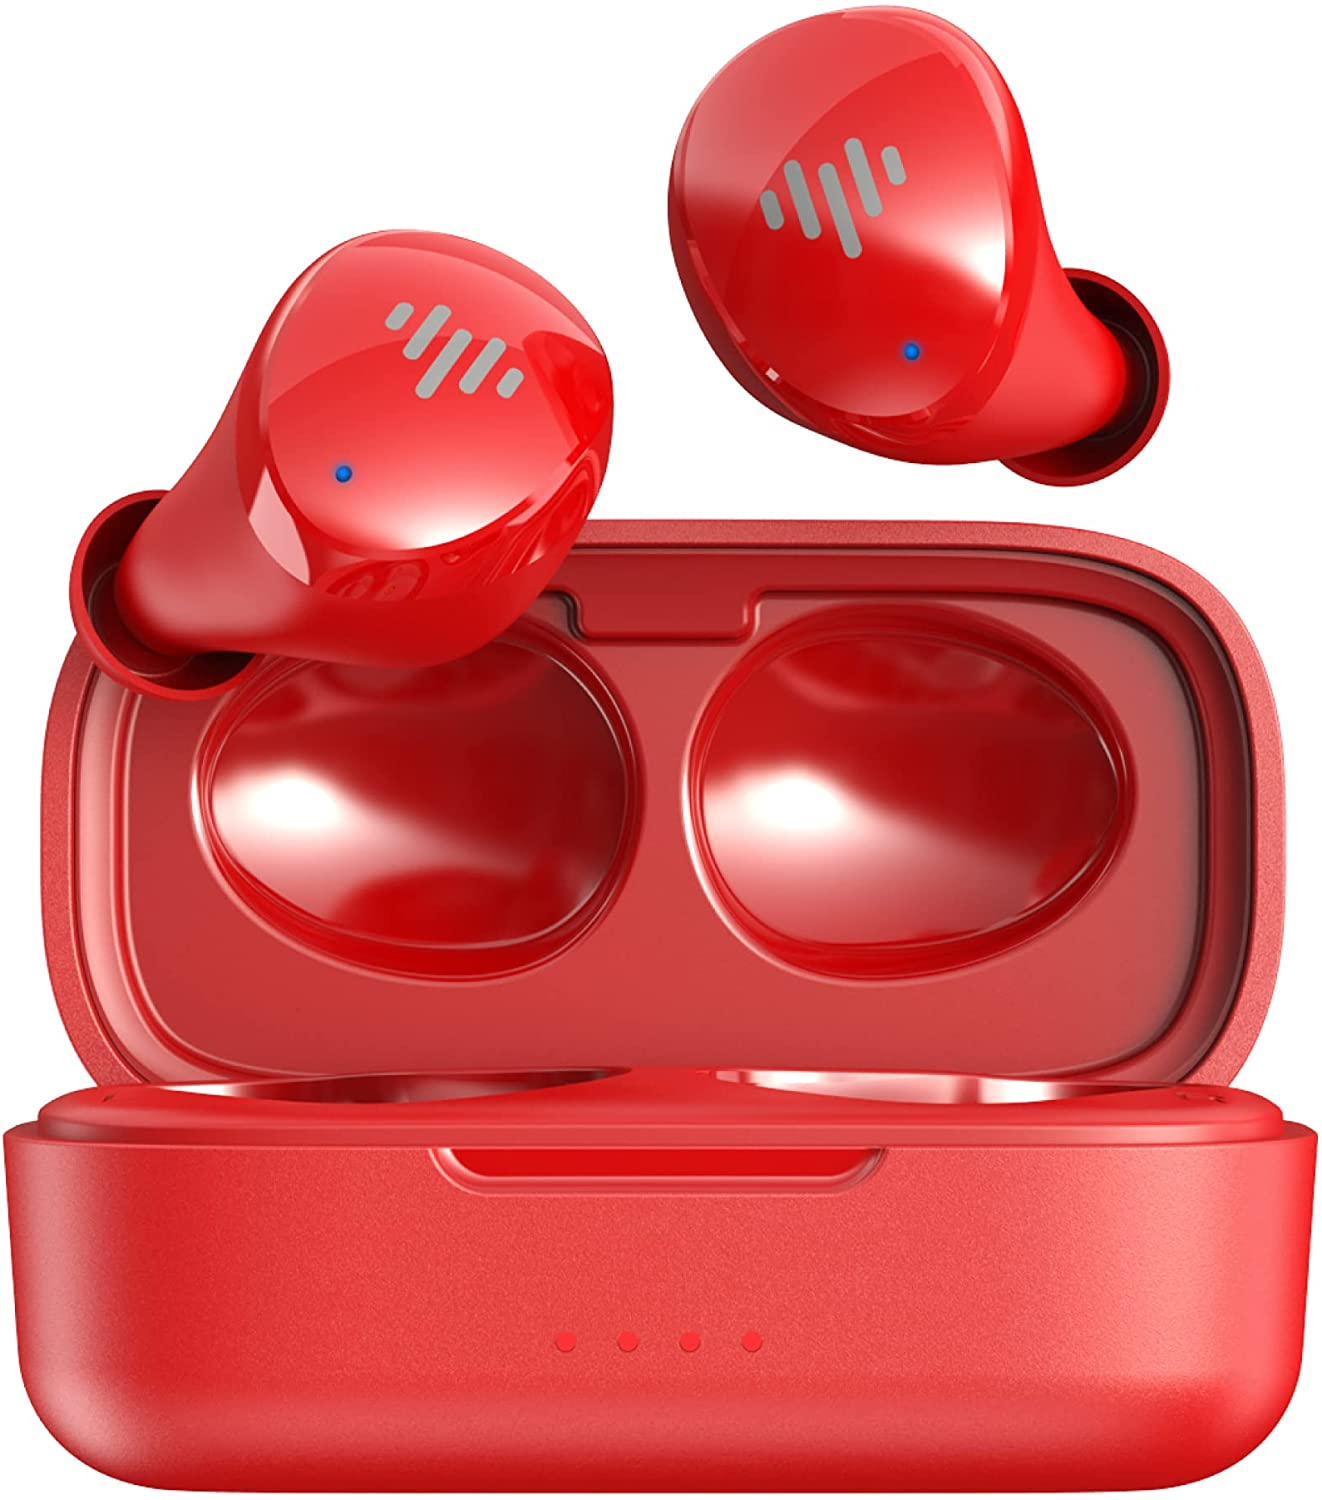 iLuv TB100 Wireless Earbuds, Bluetooth, Built-in Microphone, 20 Hour Playtime, IPX6 Waterproof Protection